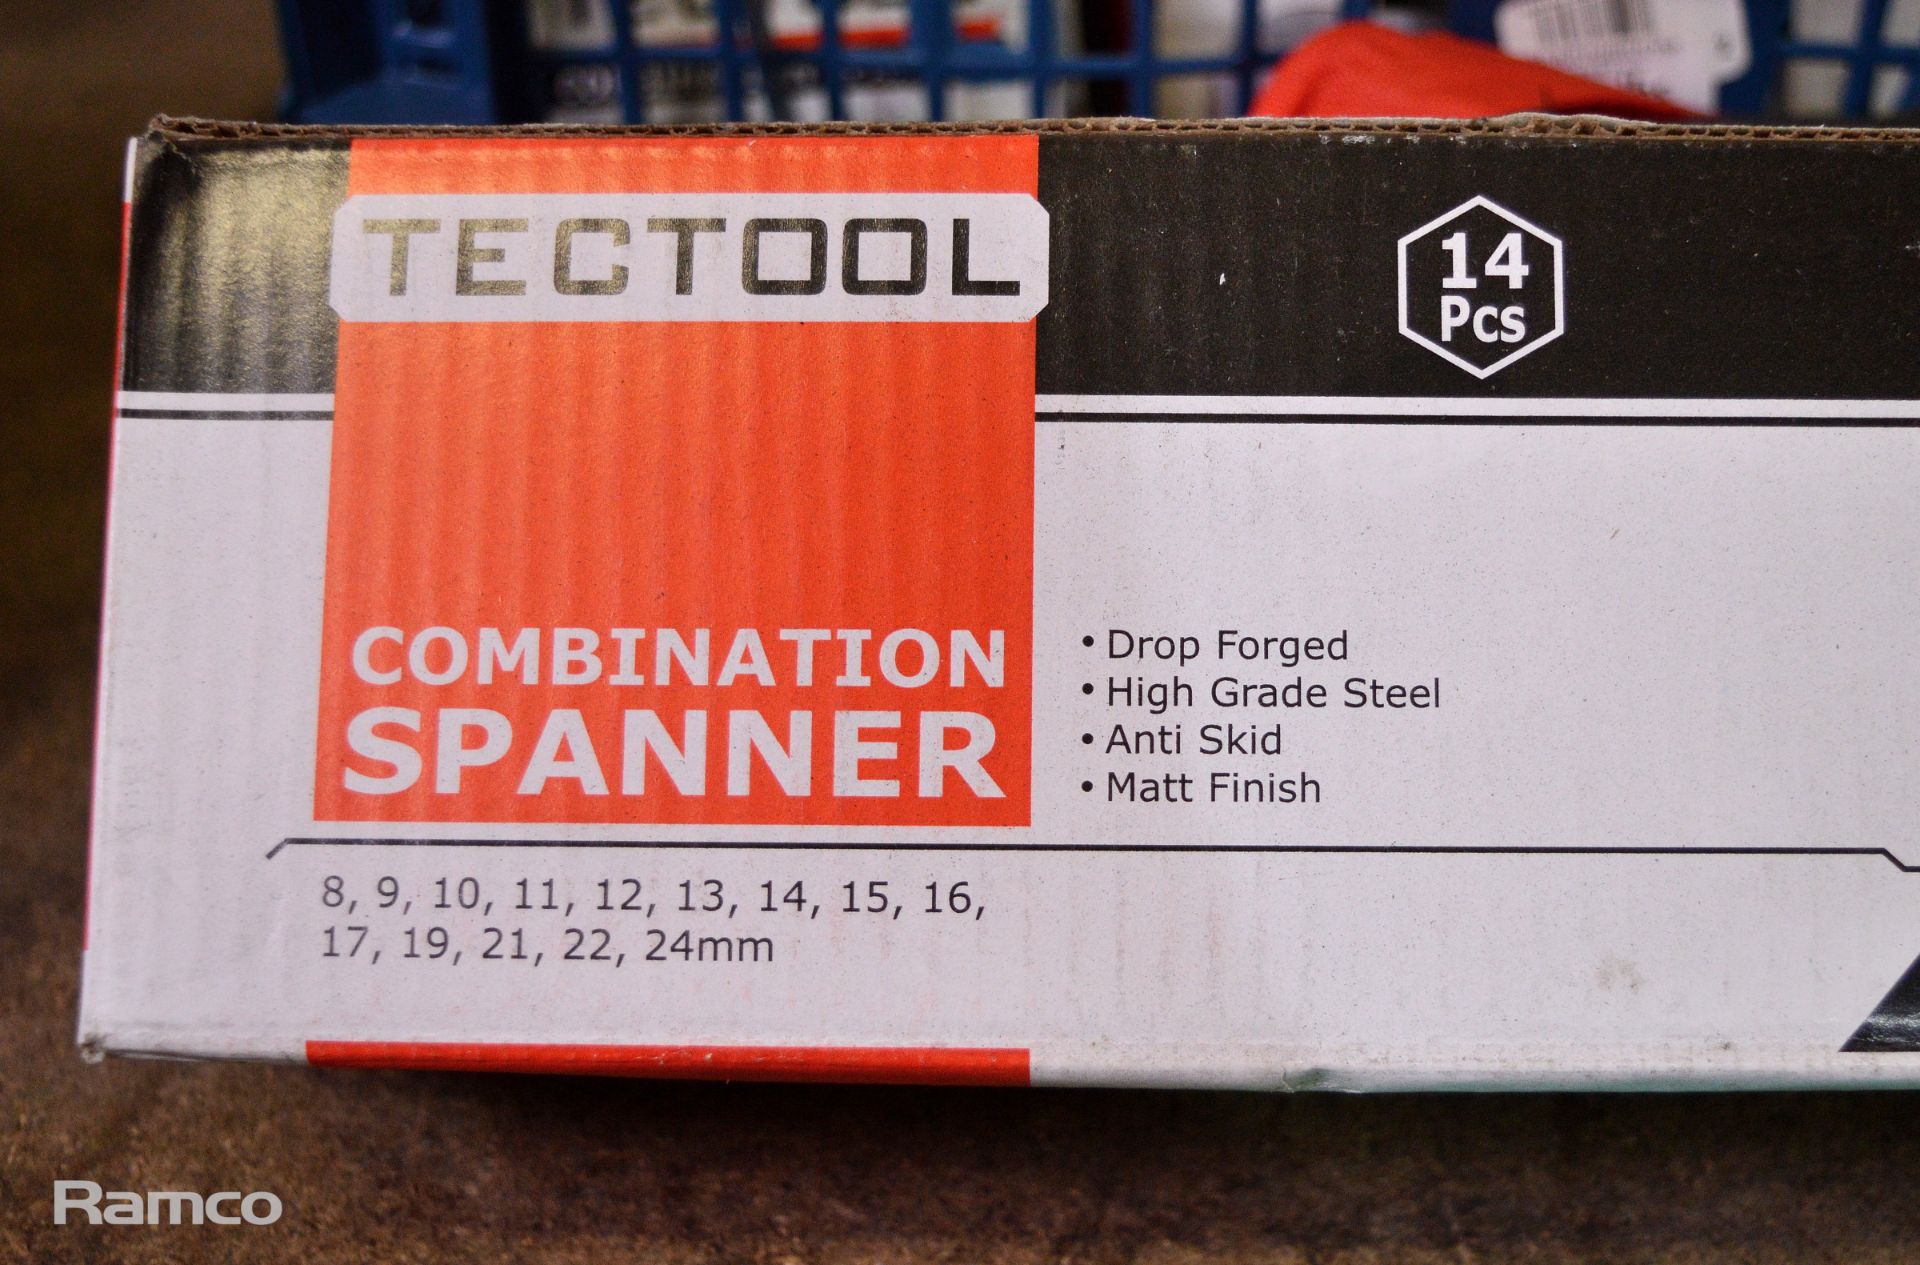 6x Tectool 14 piece combination spanner sets - Image 3 of 3